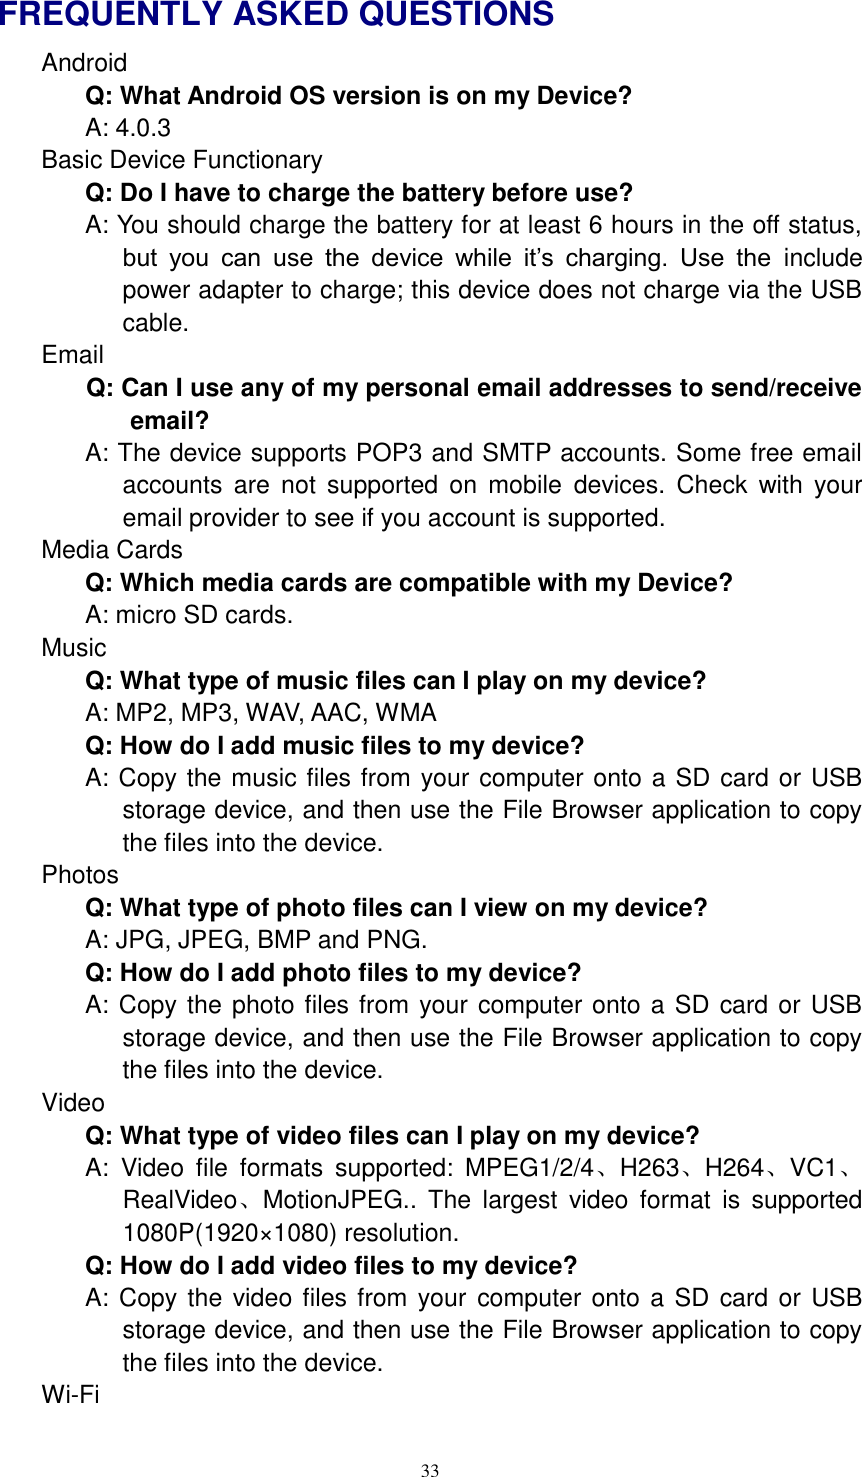  33 FREQUENTLY ASKED QUESTIONS Android   Q: What Android OS version is on my Device?   A: 4.0.3 Basic Device Functionary Q: Do I have to charge the battery before use? A: You should charge the battery for at least 6 hours in the off status, but  you  can  use  the  device  while  it’s  charging.  Use  the  include power adapter to charge; this device does not charge via the USB cable. Email Q: Can I use any of my personal email addresses to send/receive email? A: The device supports POP3 and SMTP accounts. Some free email accounts  are  not  supported  on  mobile  devices.  Check  with  your email provider to see if you account is supported. Media Cards       Q: Which media cards are compatible with my Device? A: micro SD cards. Music Q: What type of music files can I play on my device? A: MP2, MP3, WAV, AAC, WMA Q: How do I add music files to my device? A: Copy the music files from your computer onto a SD card or USB storage device, and then use the File Browser application to copy the files into the device. Photos Q: What type of photo files can I view on my device? A: JPG, JPEG, BMP and PNG. Q: How do I add photo files to my device? A: Copy the photo files from your computer onto a SD card or USB storage device, and then use the File Browser application to copy the files into the device. Video Q: What type of video files can I play on my device? A: Video  file  formats  supported:  MPEG1/2/4、H263、H264、VC1、RealVideo、MotionJPEG..  The  largest  video  format  is  supported 1080P(1920×1080) resolution. Q: How do I add video files to my device? A: Copy the video files from  your  computer onto a SD  card or USB storage device, and then use the File Browser application to copy the files into the device. Wi-Fi 